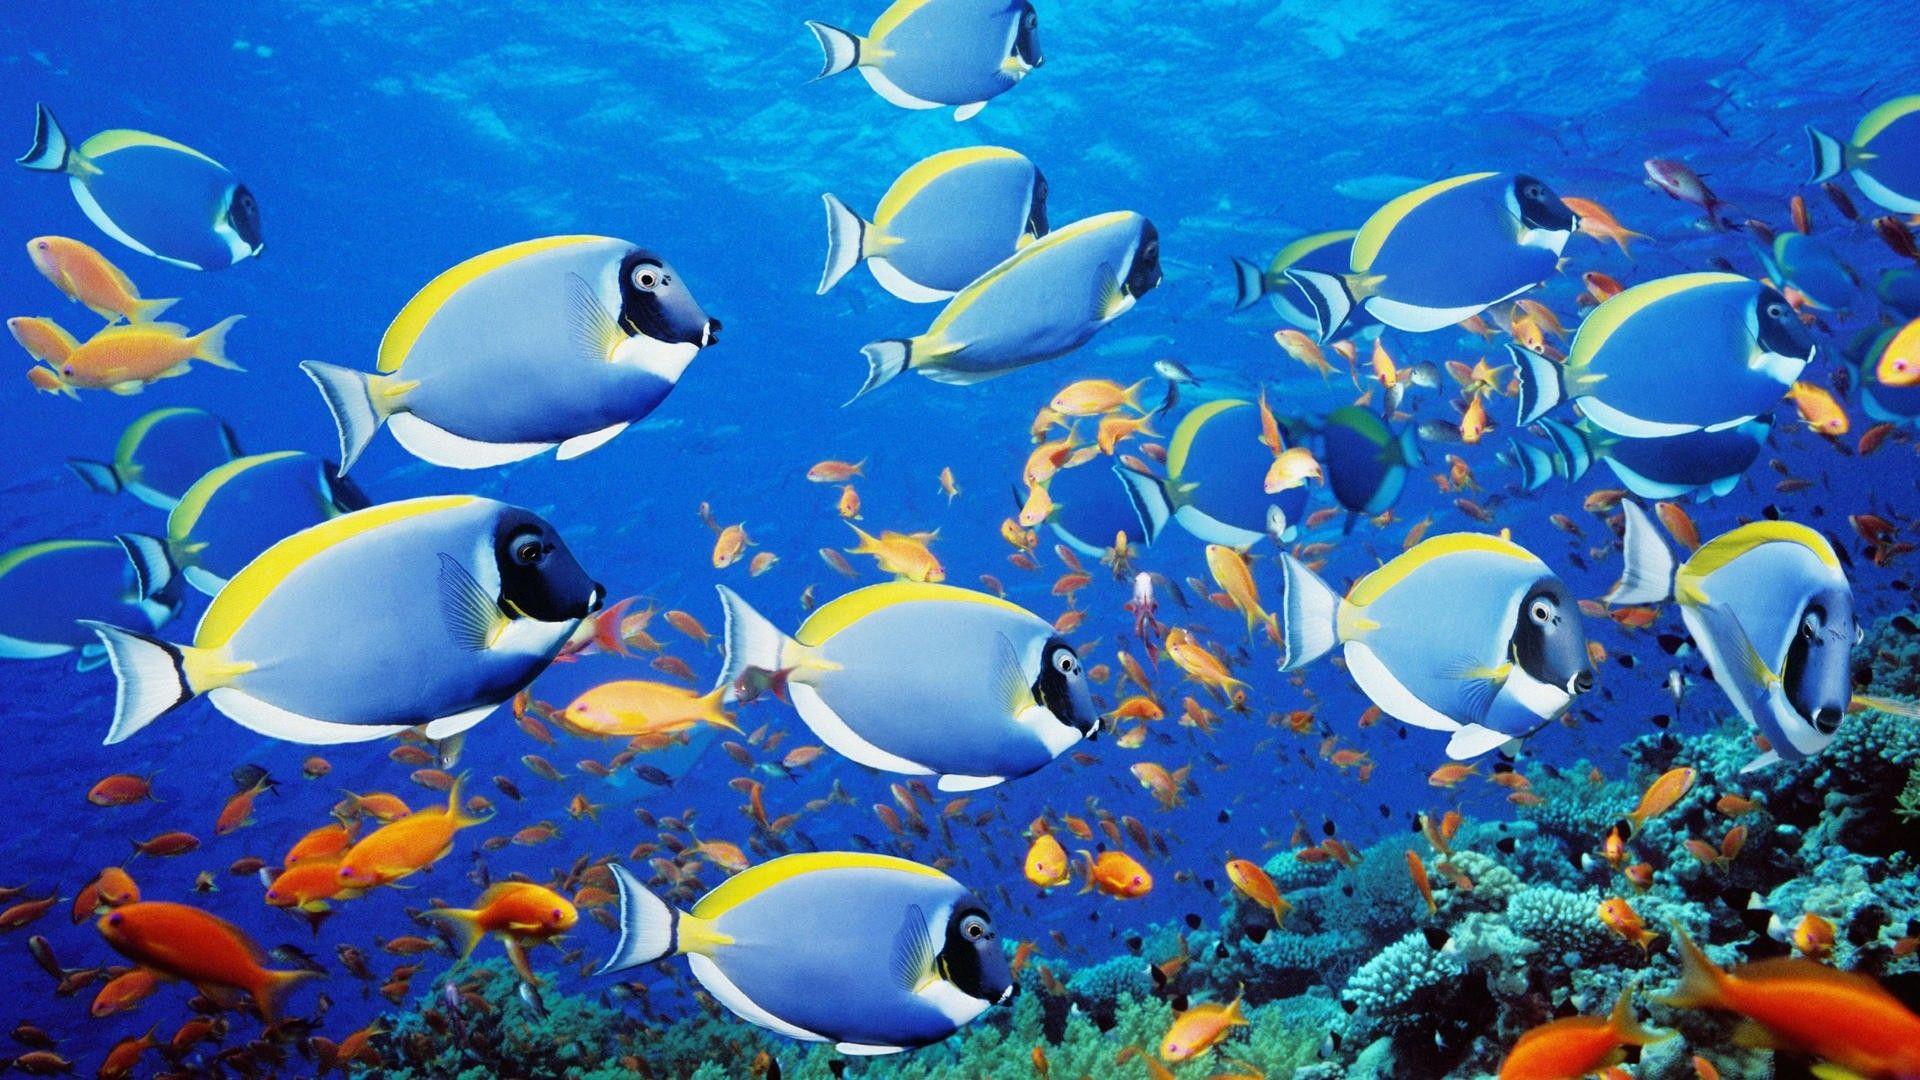 Blue fish in the tropics wallpaper and image